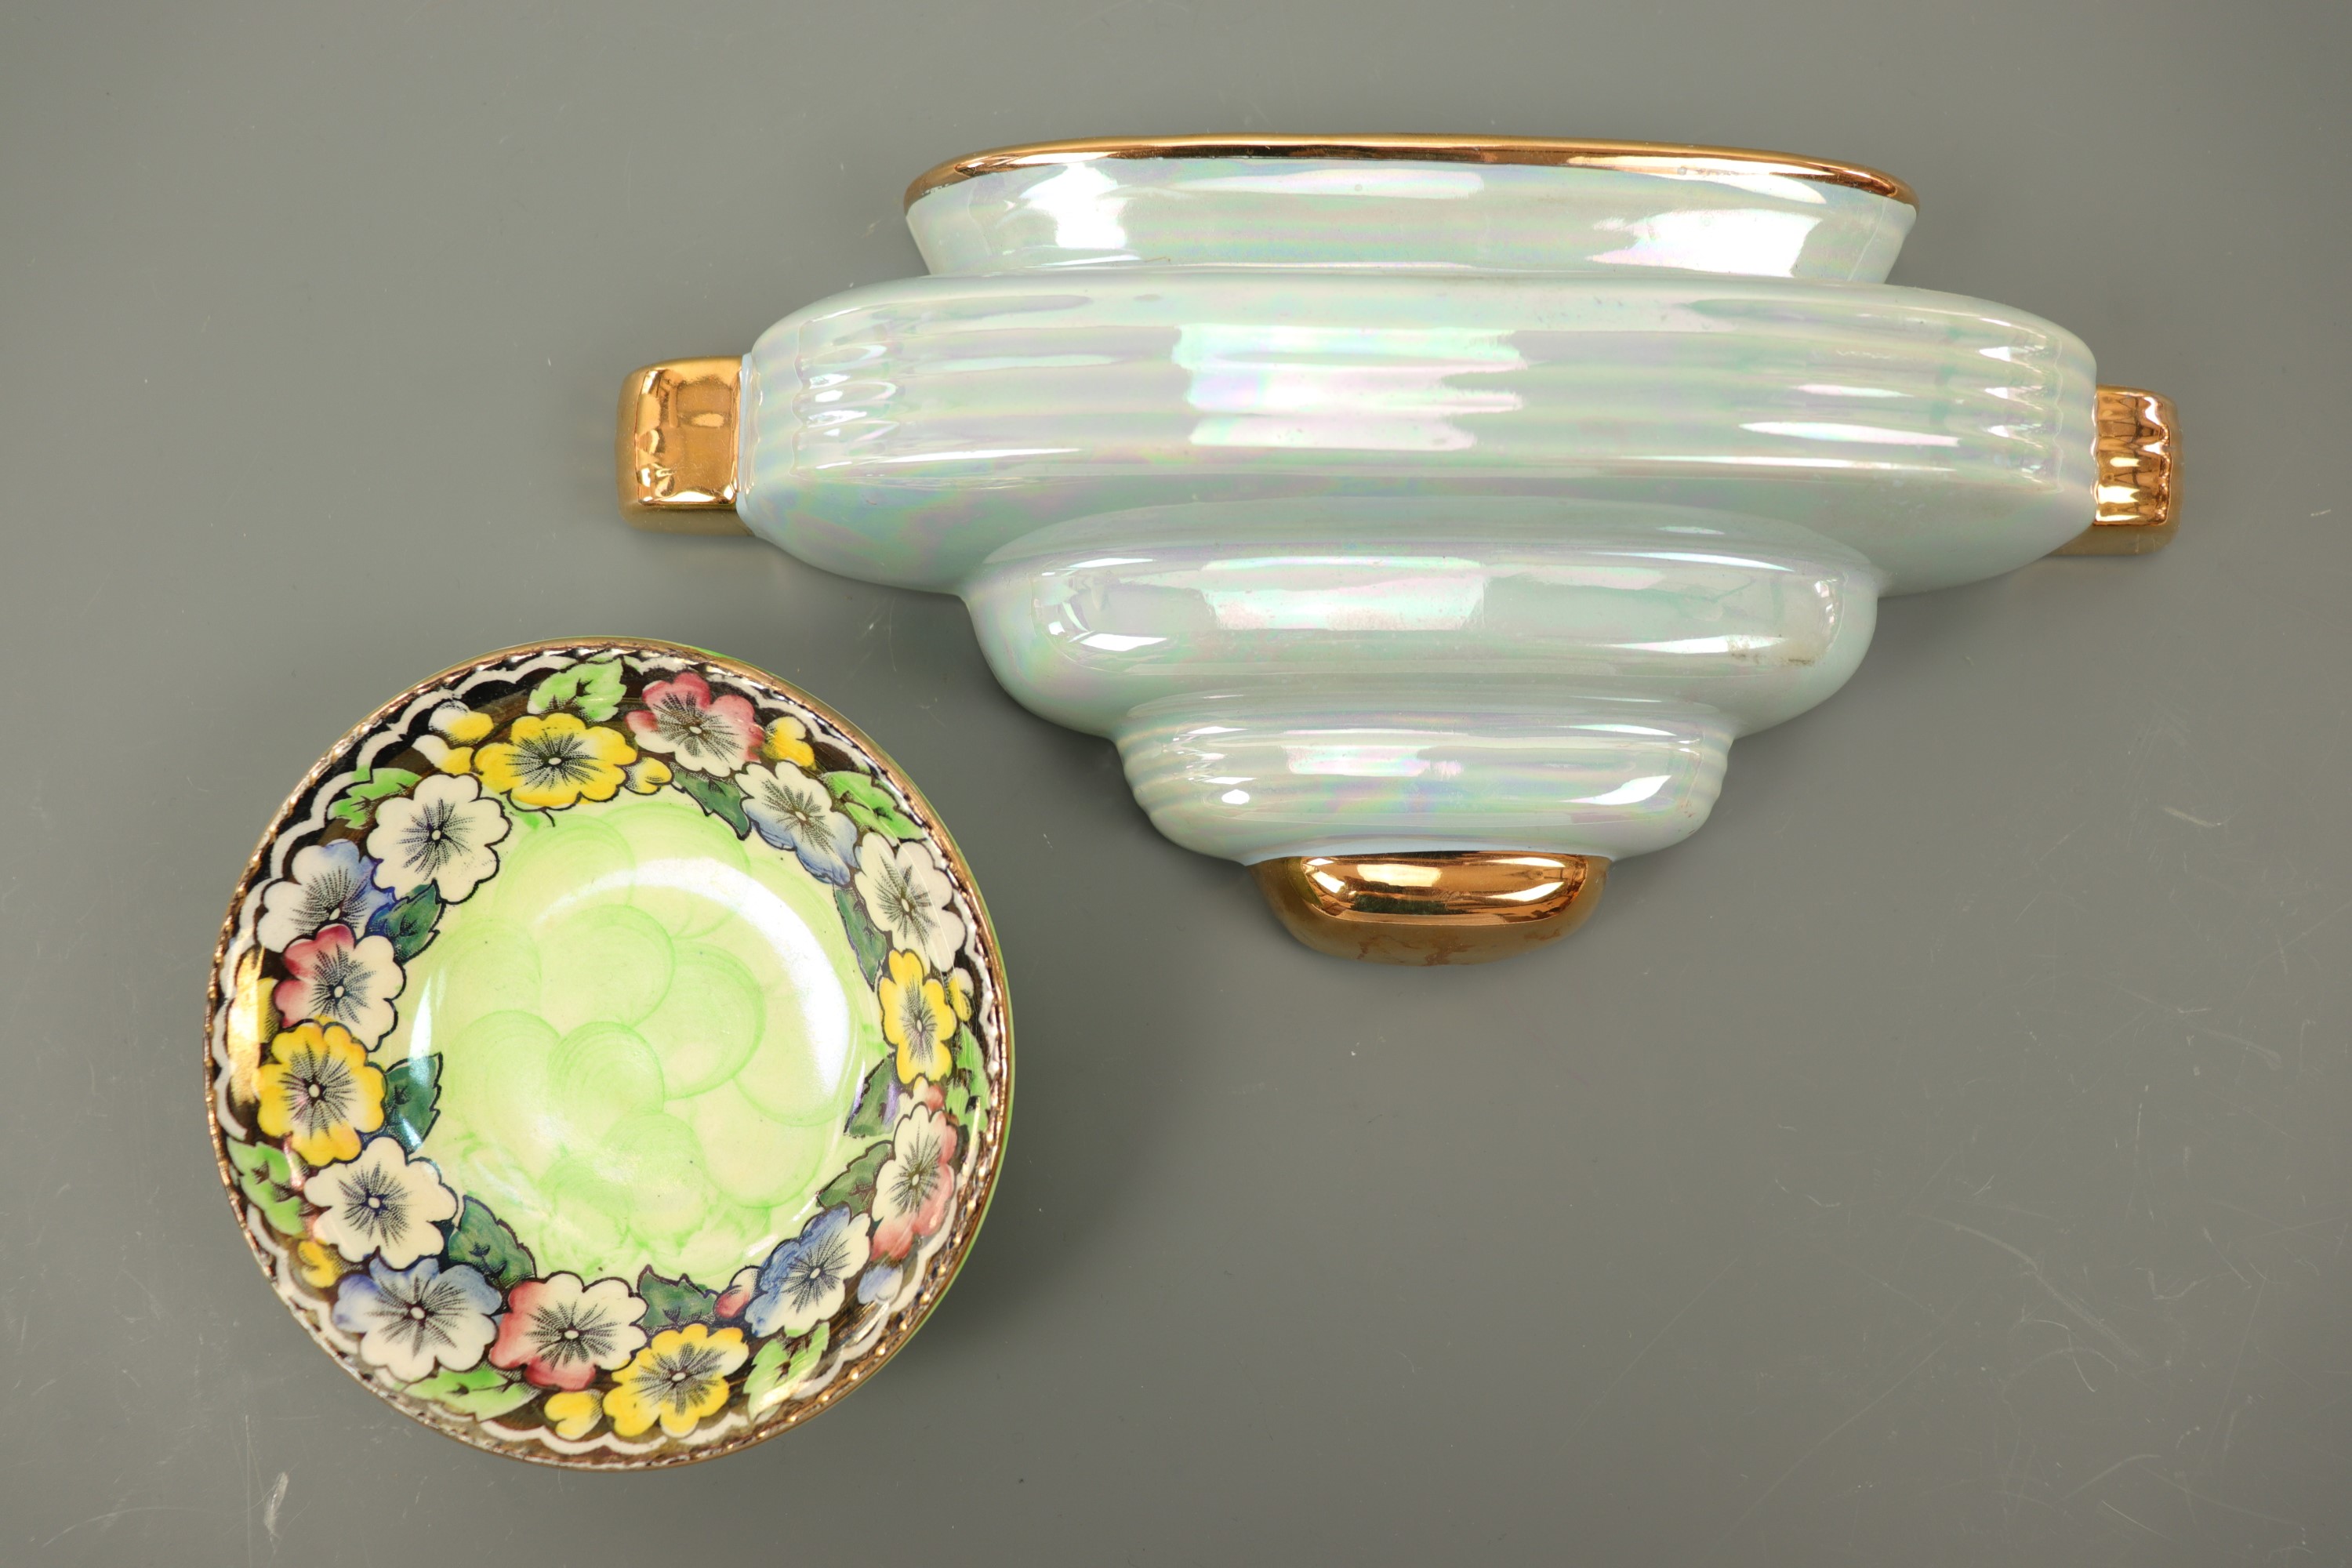 A Sadler art deco wall pocket together with a Maling dish, 10 cm diameter